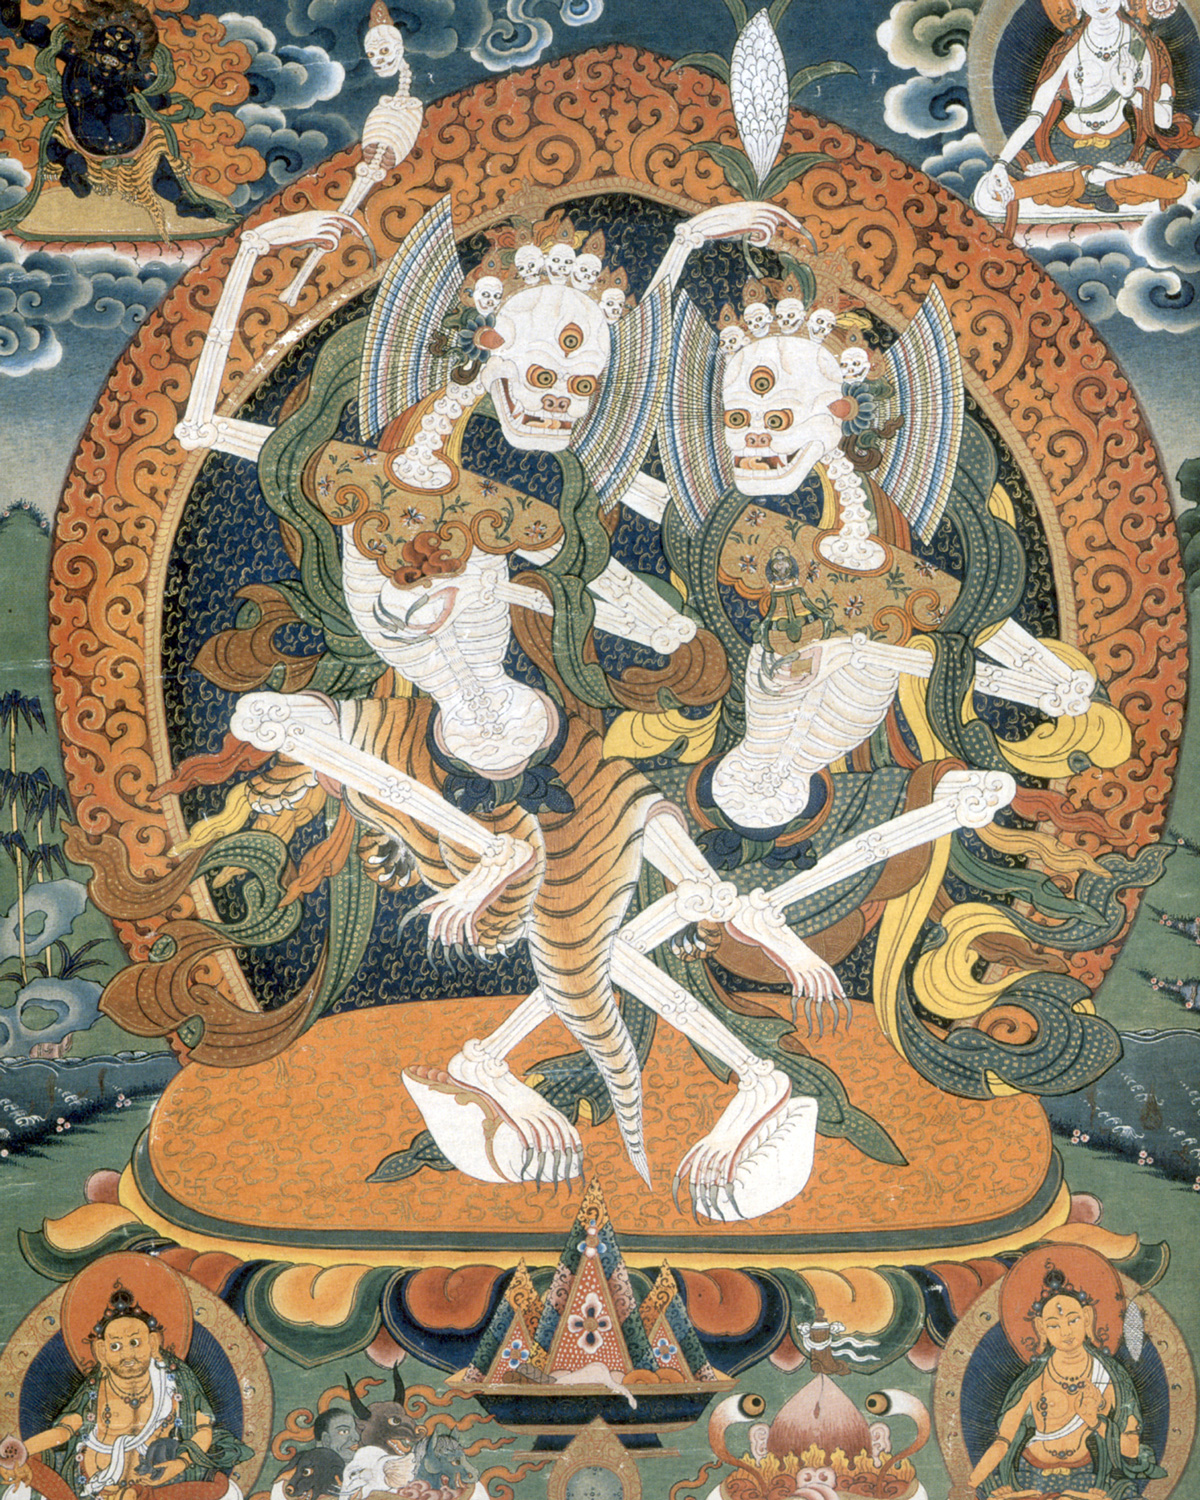 A nineteenth-century Tibetan painting of the Lords of the Charnel Ground.